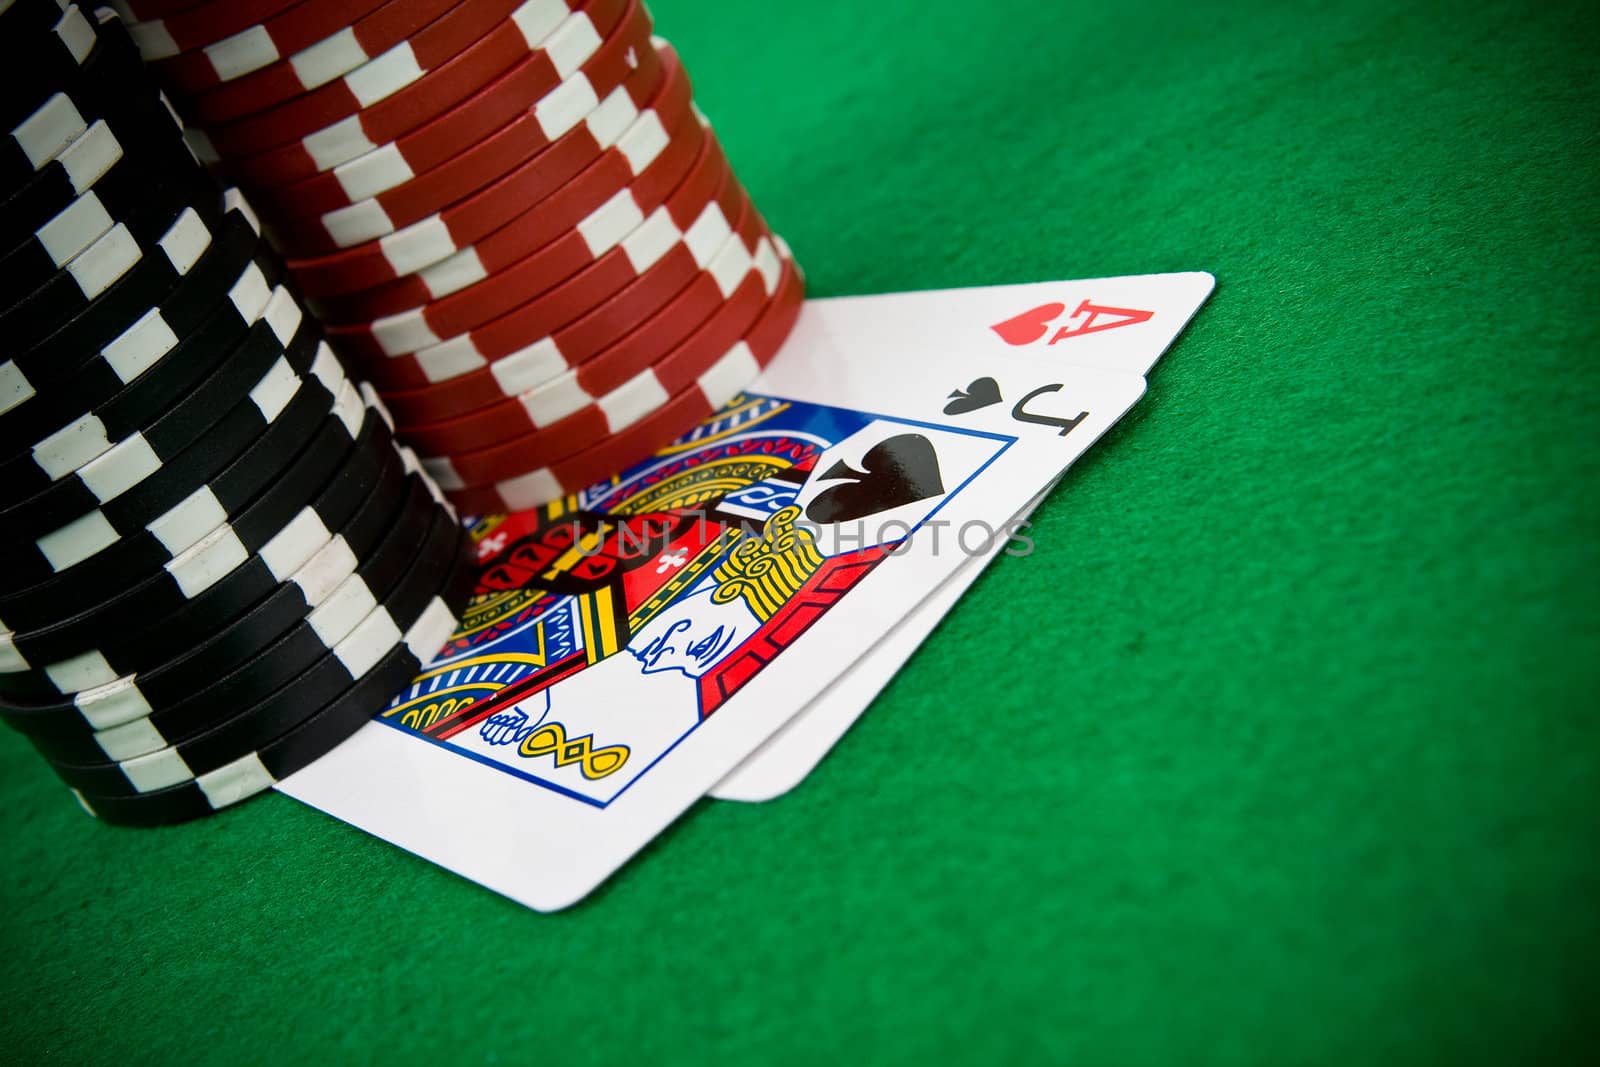 Ace of hearts and black jack with stack of black and red poker chips in the background.